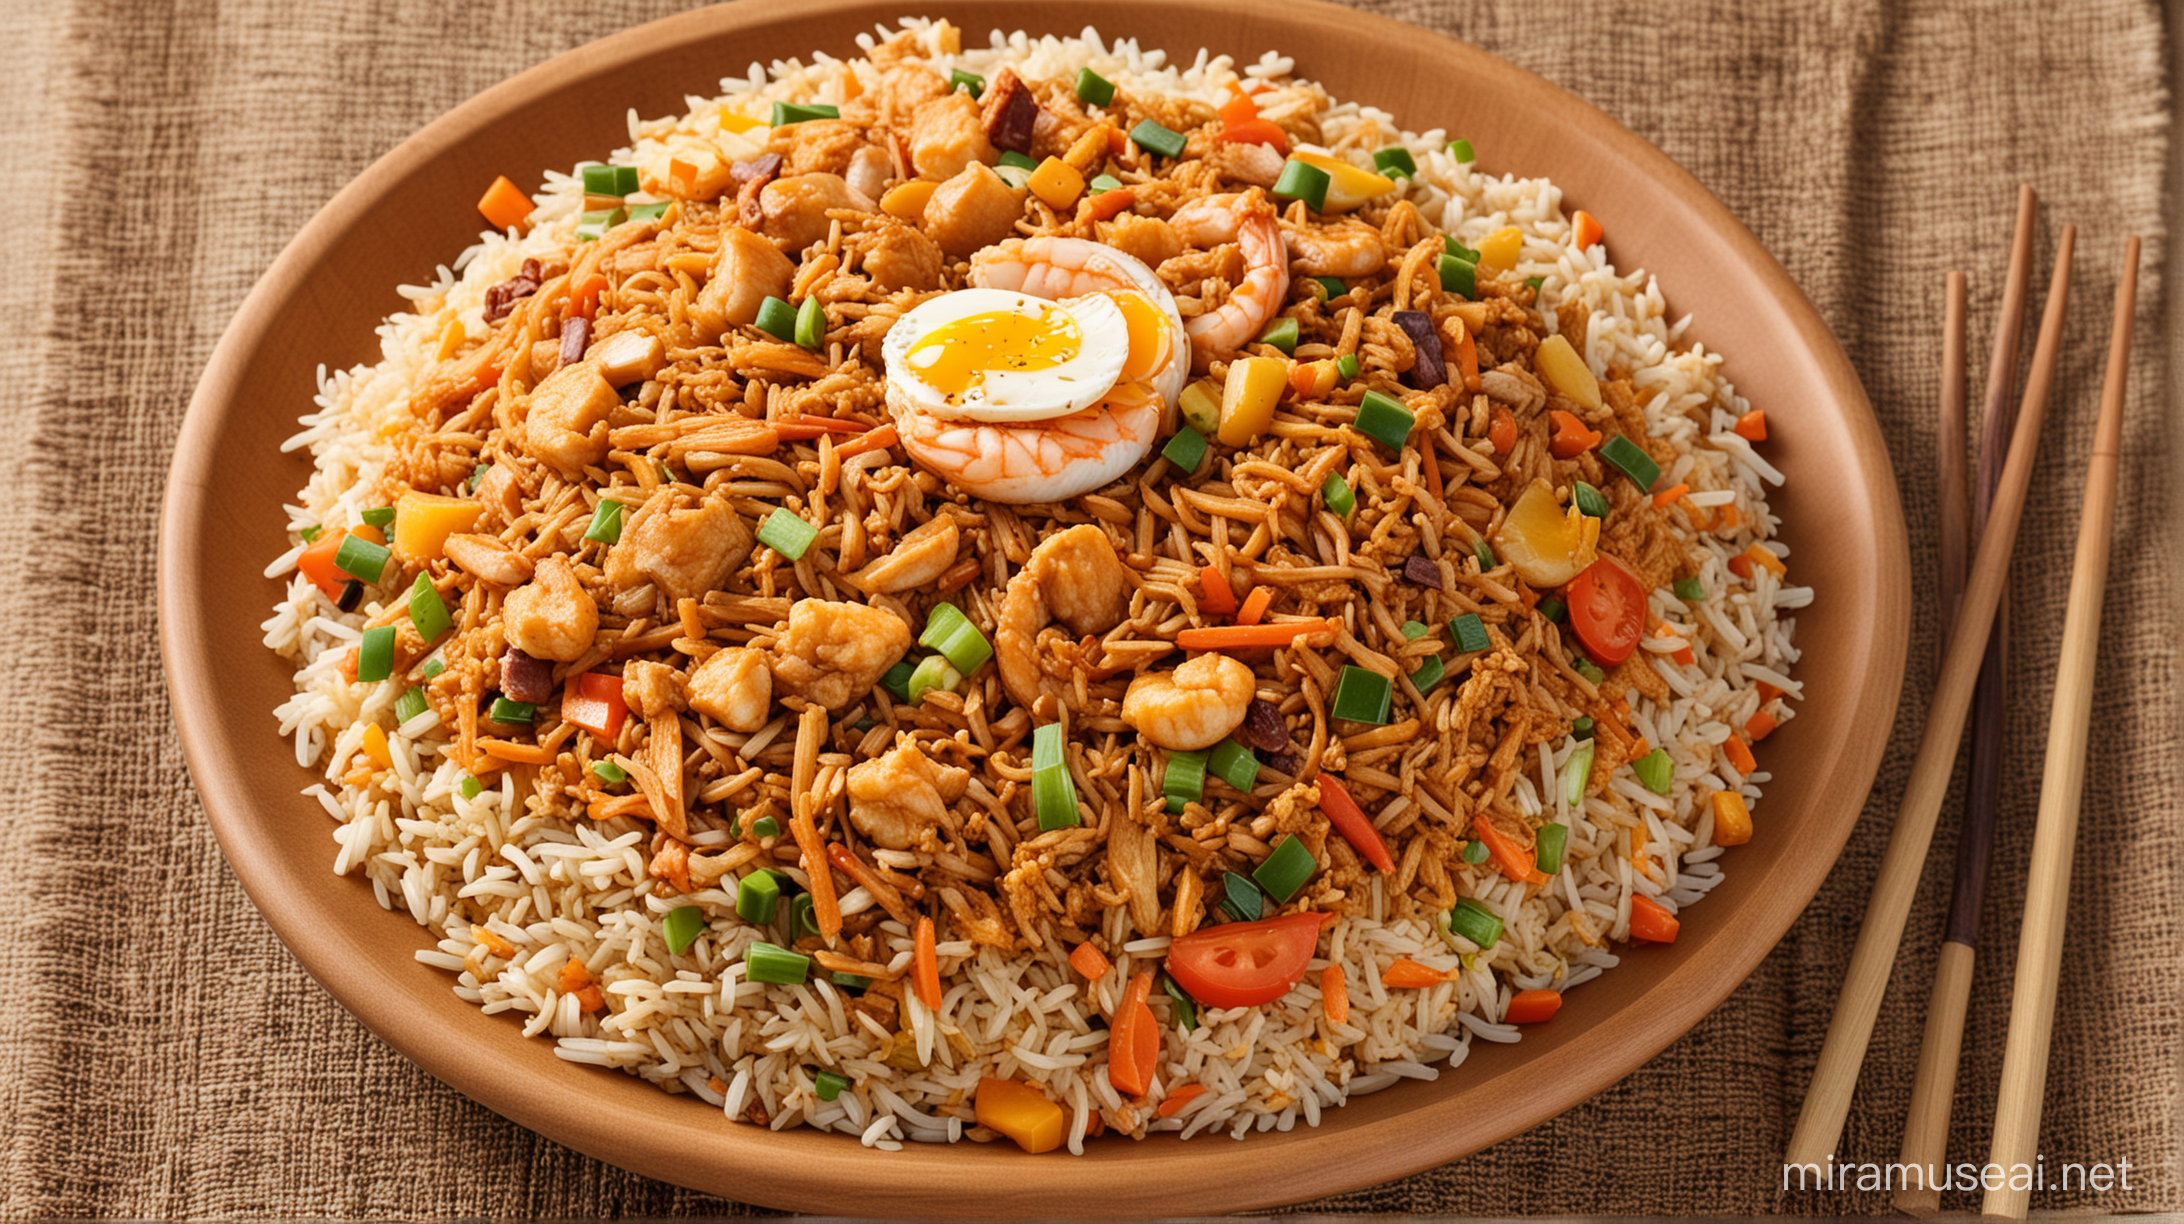 Nasi Goreng Indonesia: Nasi Goreng is a famous Indonesian fried rice dish, with soft cooked rice stir-fried with chicken or shrimp, eggs, vegetables and spices, creating a rich and attractive image of the Southeast region. ASIAN.